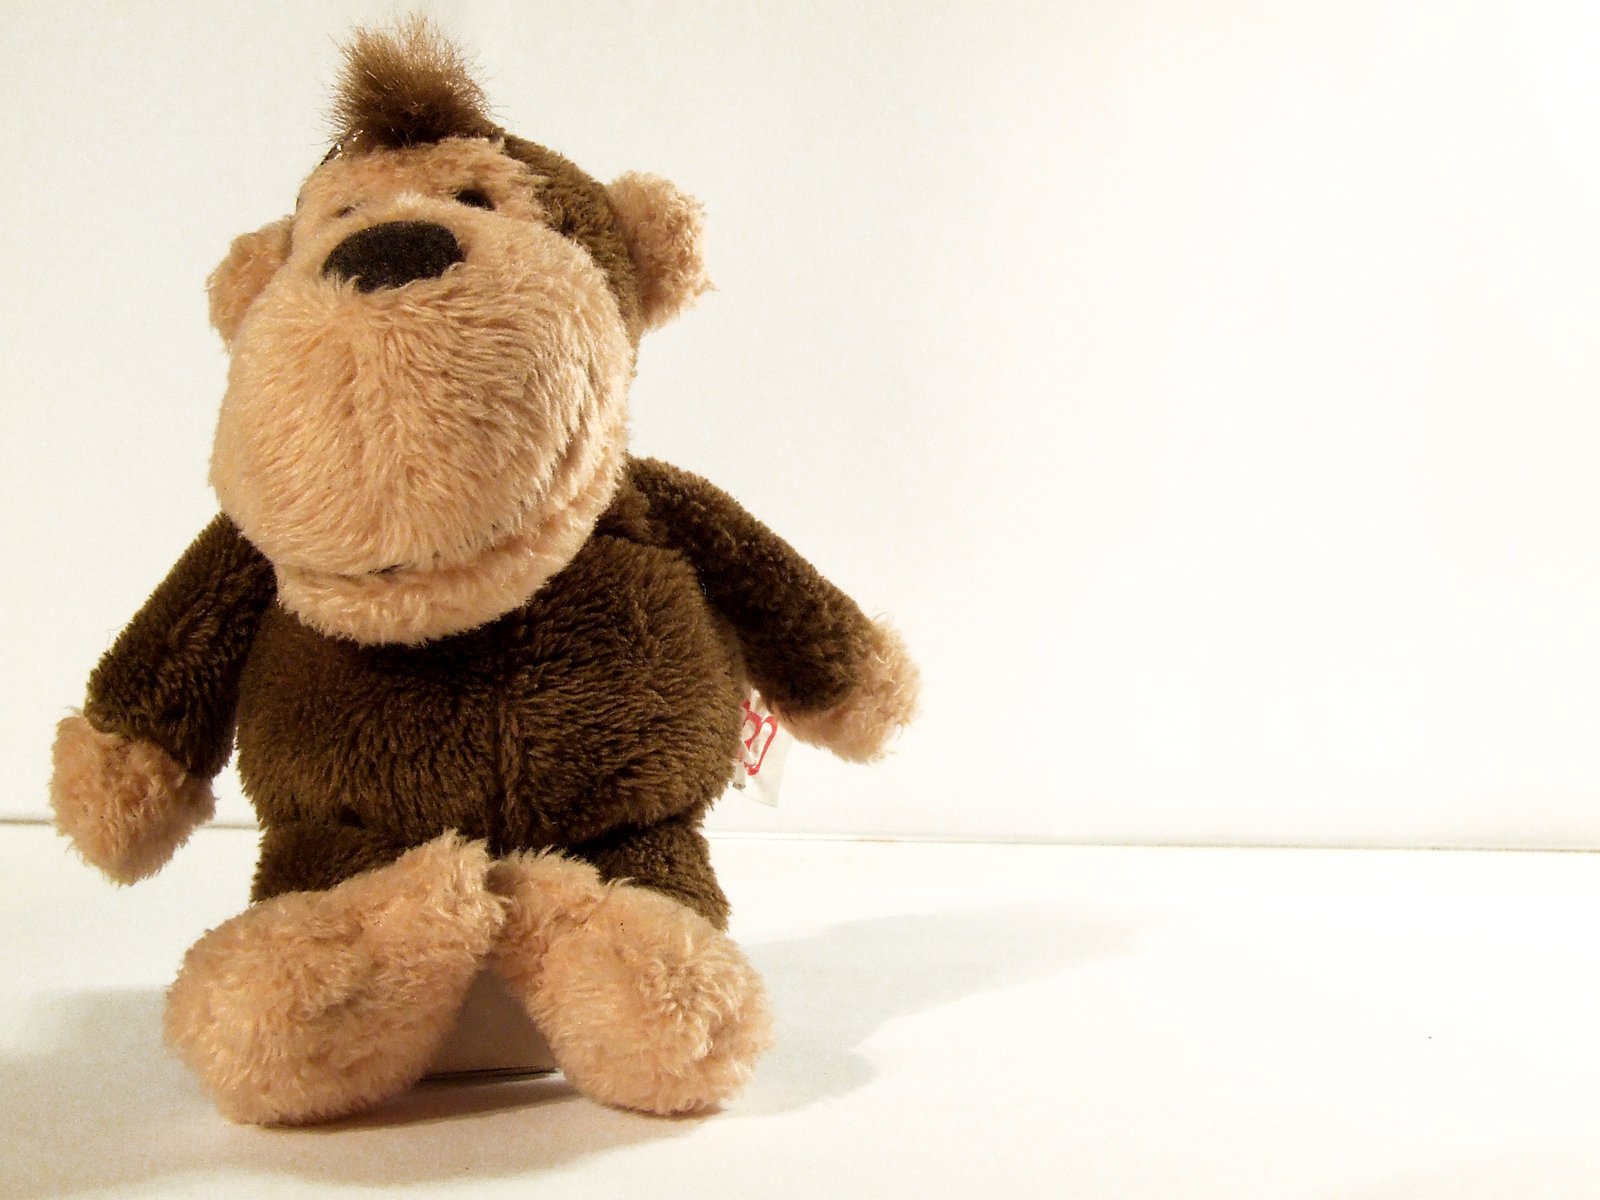 a plush monkey sitting down with his back turned